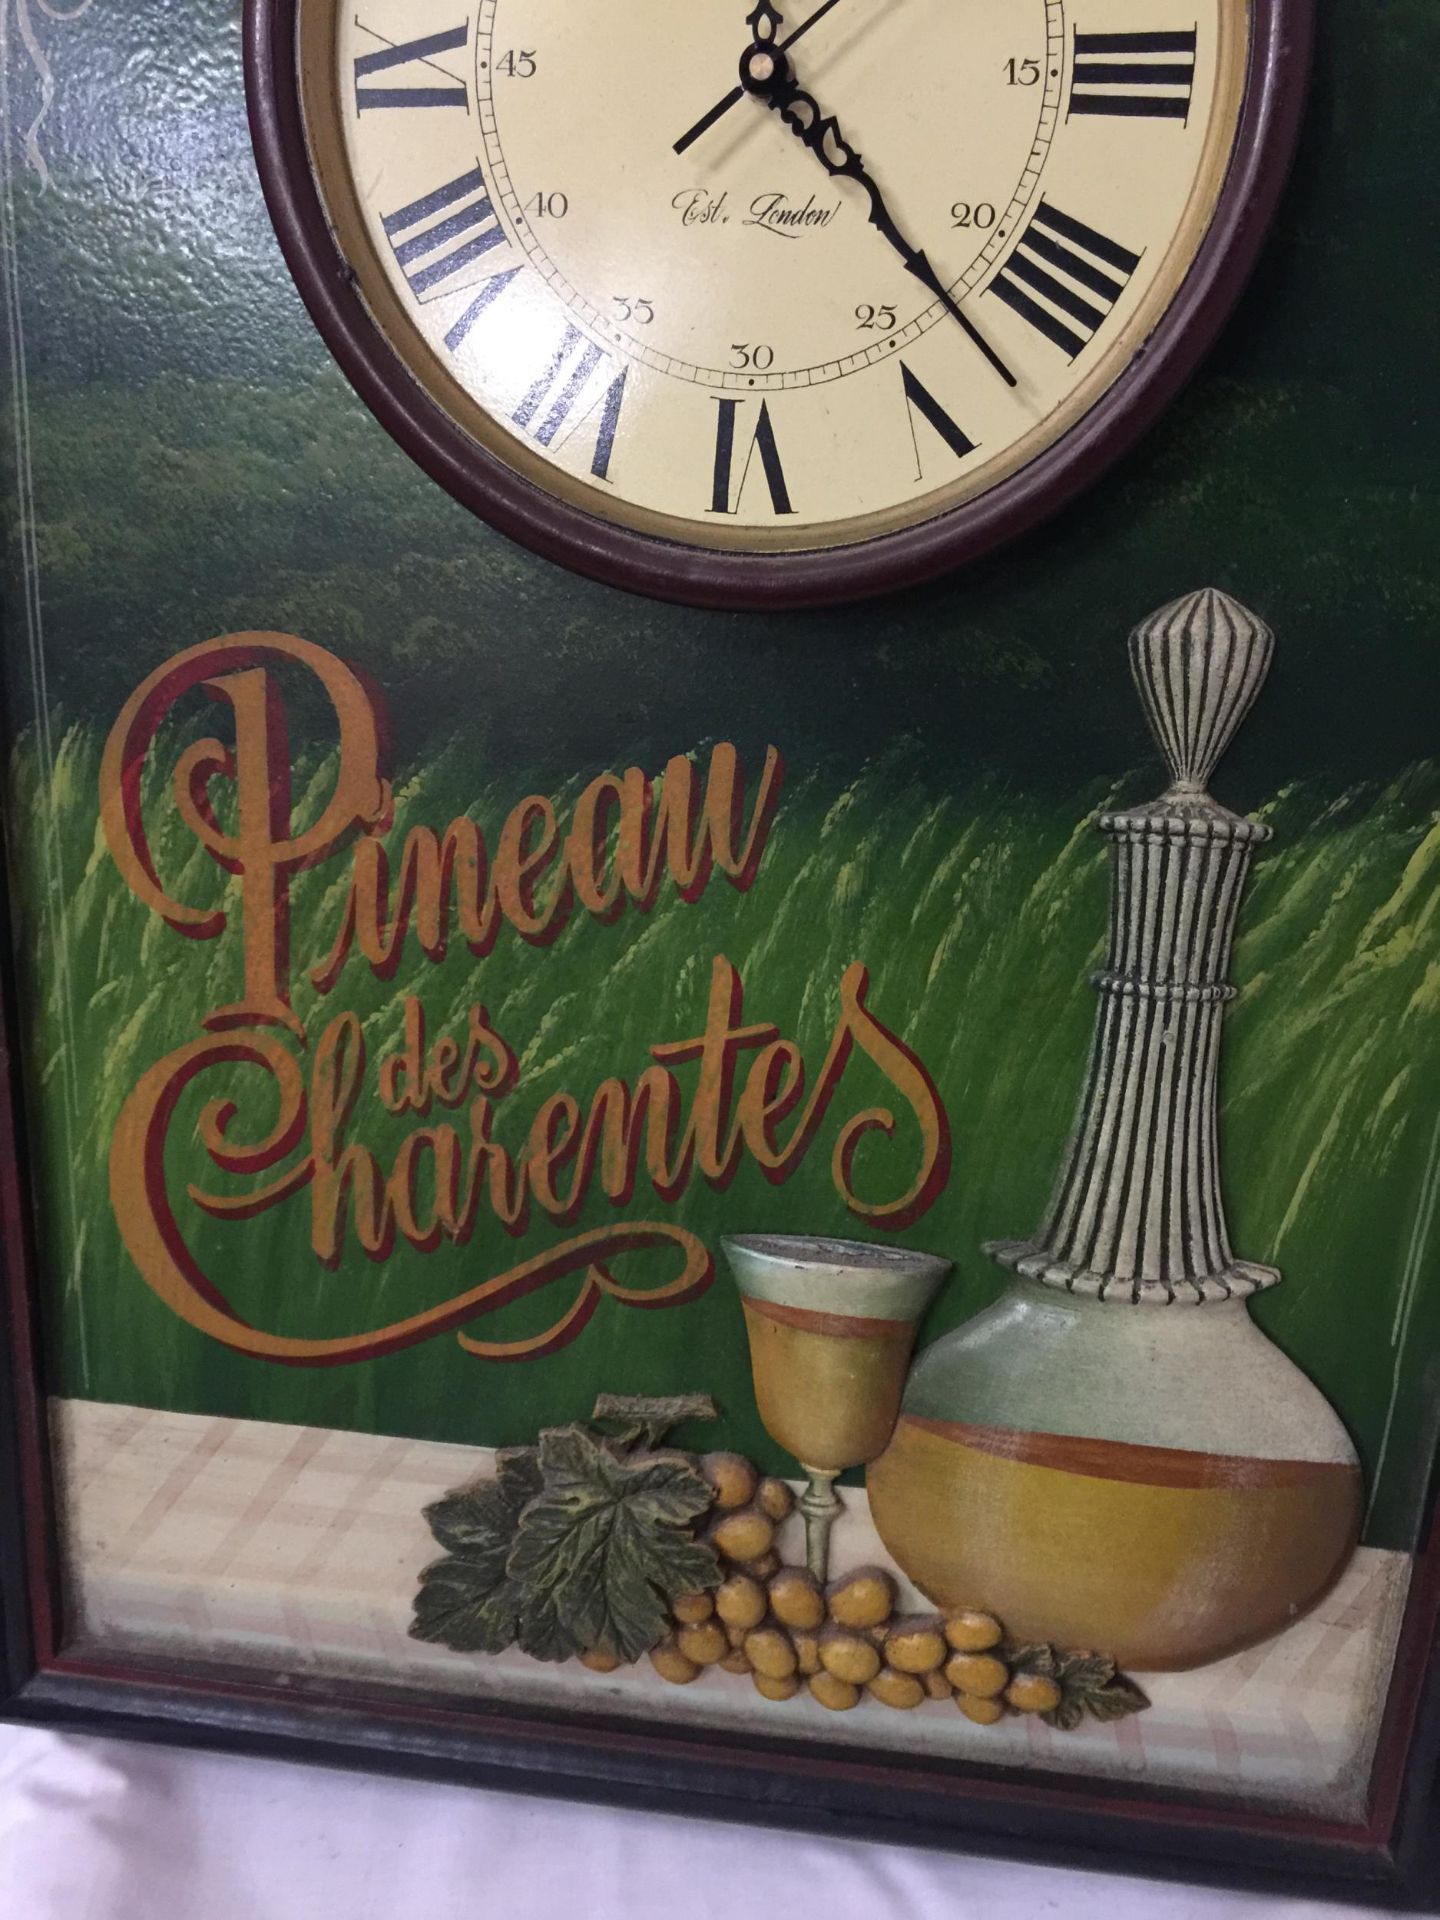 A PINEAU DES CHARENTES ADVERTISING BOARD WITH CLOCK - Image 4 of 5